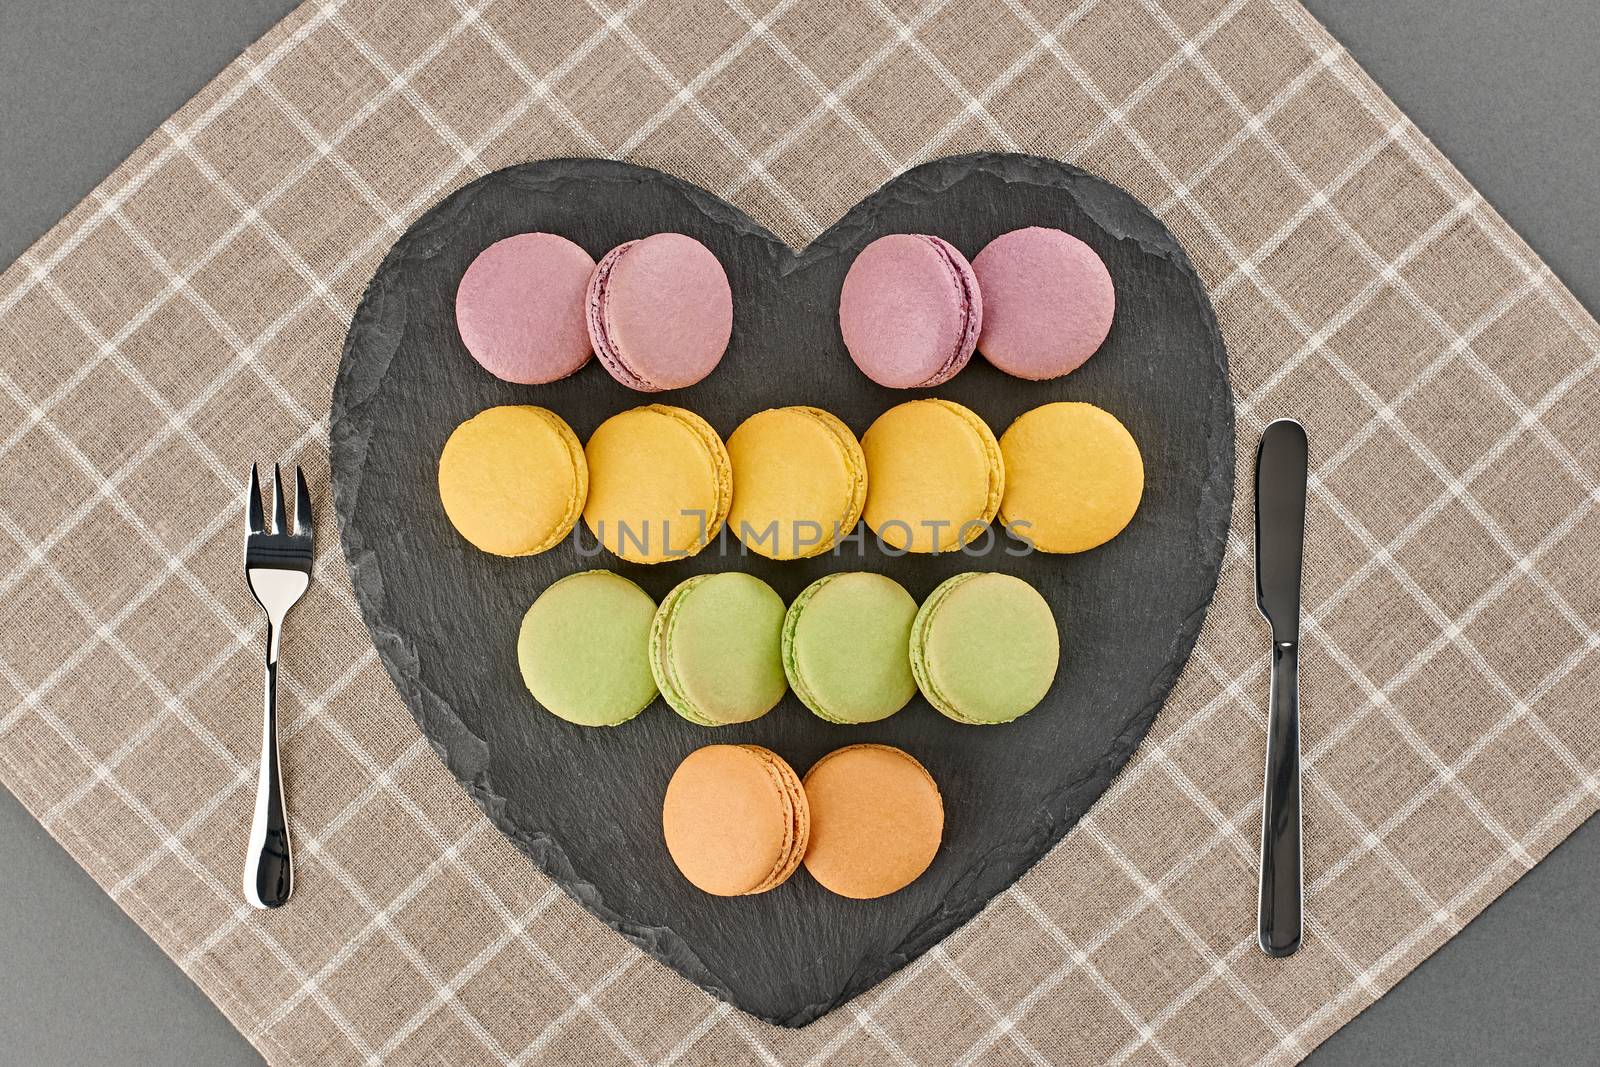 Still life, macarons sweet colorful, heart shape, fork and knife, black placemat. French traditional dessert, table setting.Unusual creative romantic, gray background.Concept love story.Valentines Day